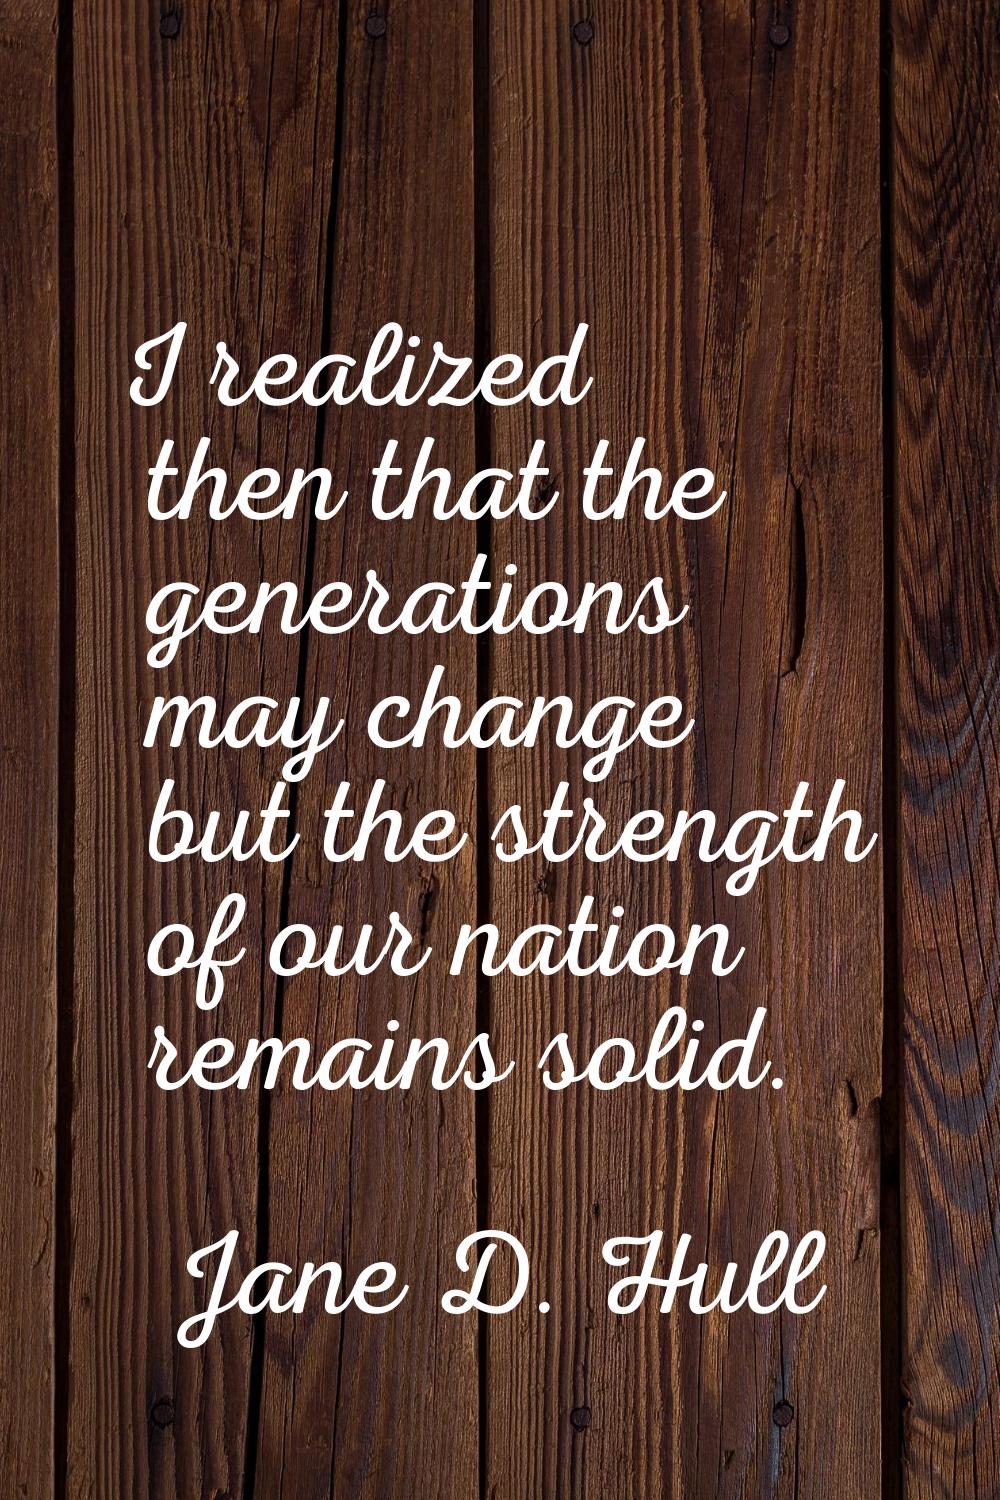 I realized then that the generations may change but the strength of our nation remains solid.